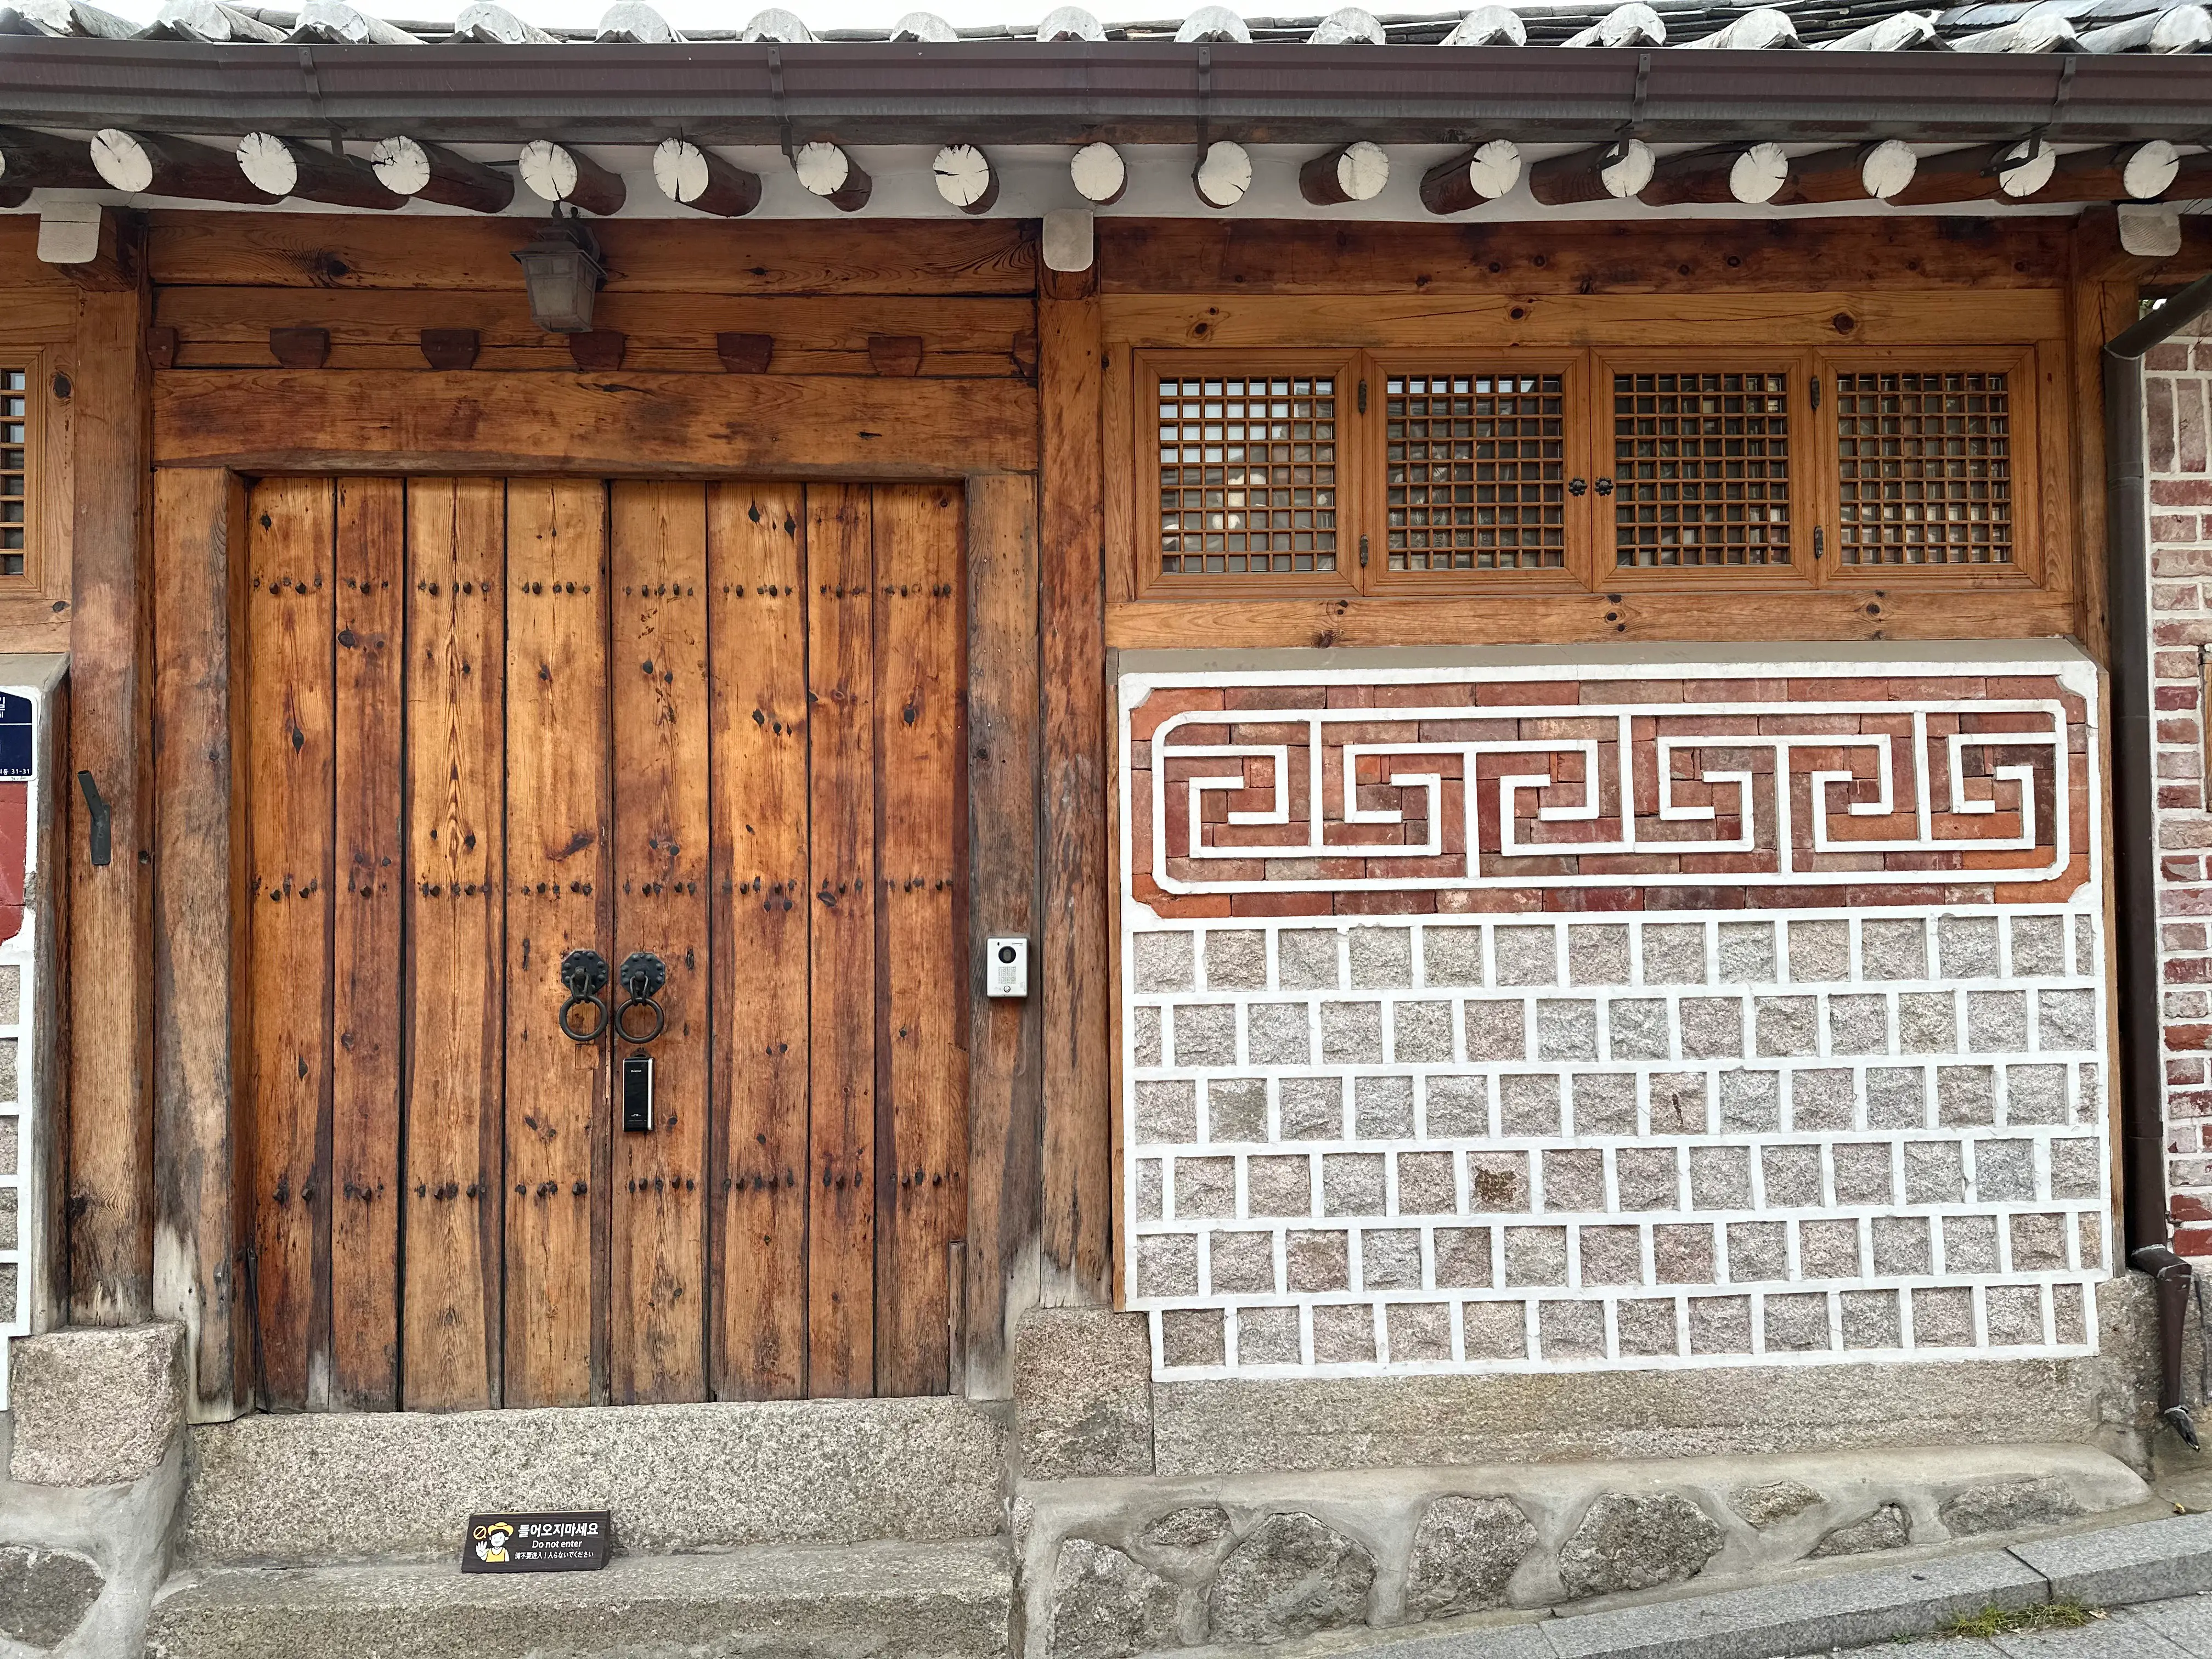 The Beauty of a Hanok Lies in Its Door and Wall Patterns